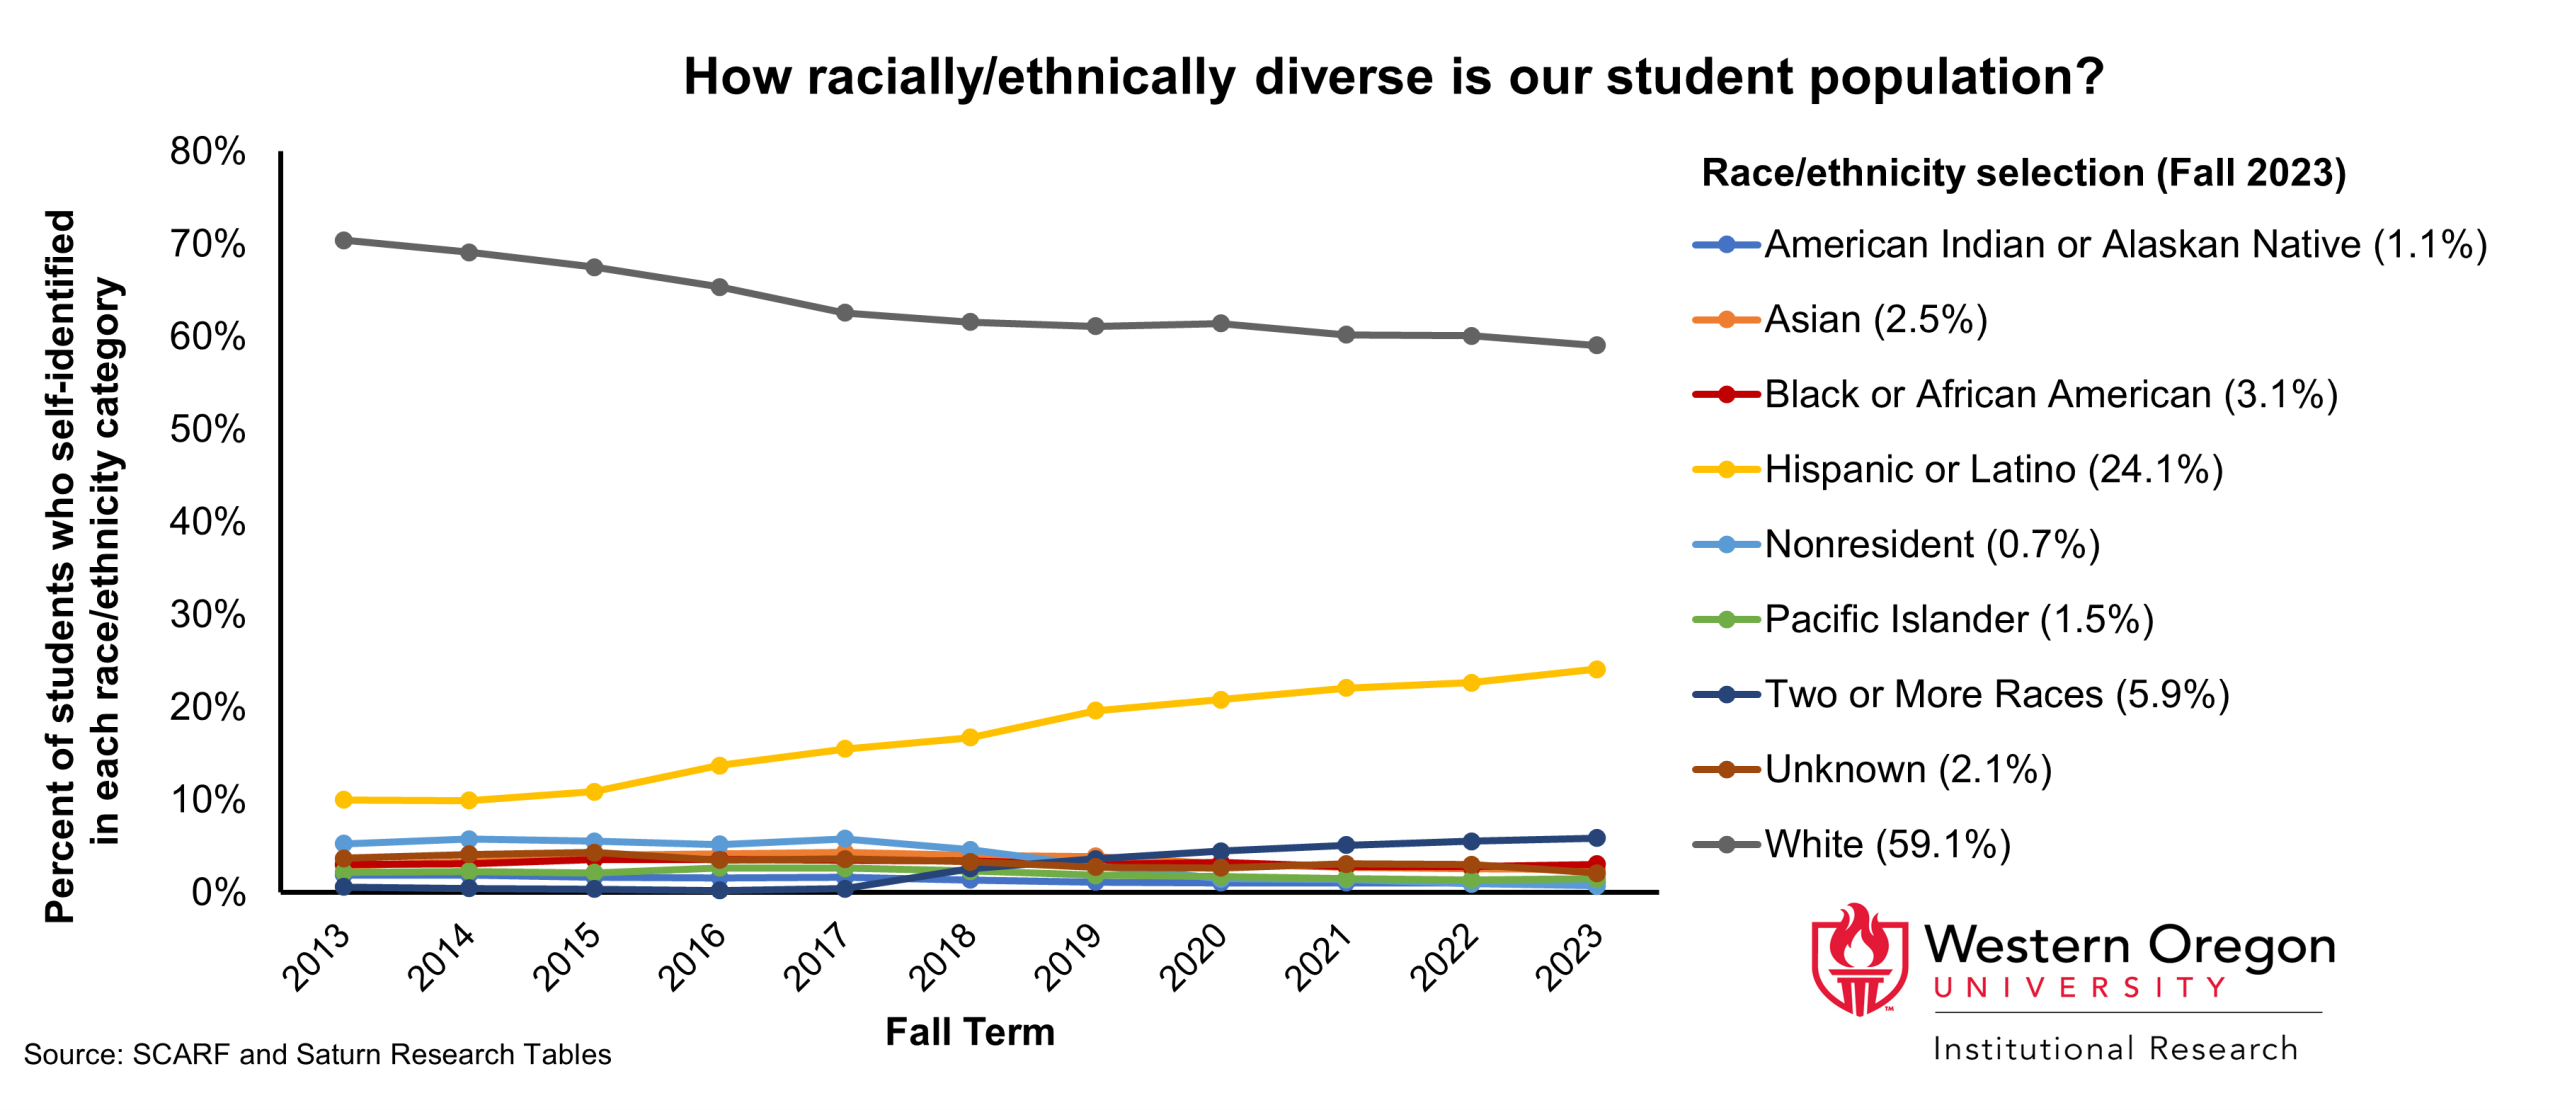 The percentage of first-time, full-time students at WOU who identify as Hispanic or Latino has been steadily increasing since 2012.